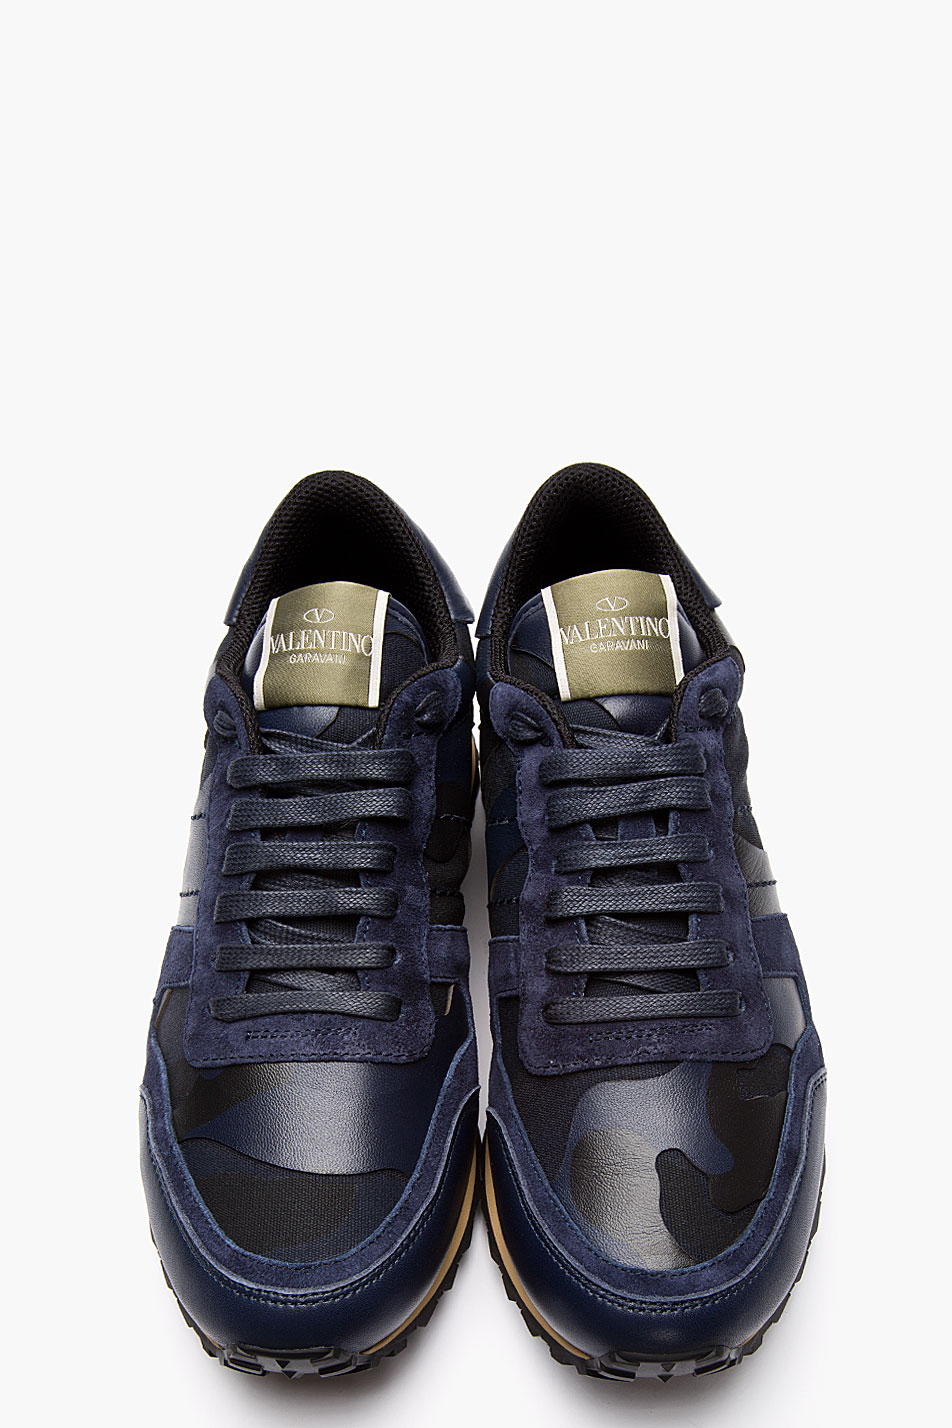 Lyst - Valentino Navy Suede Leather Trimmed Studded Sneakers in Blue ...